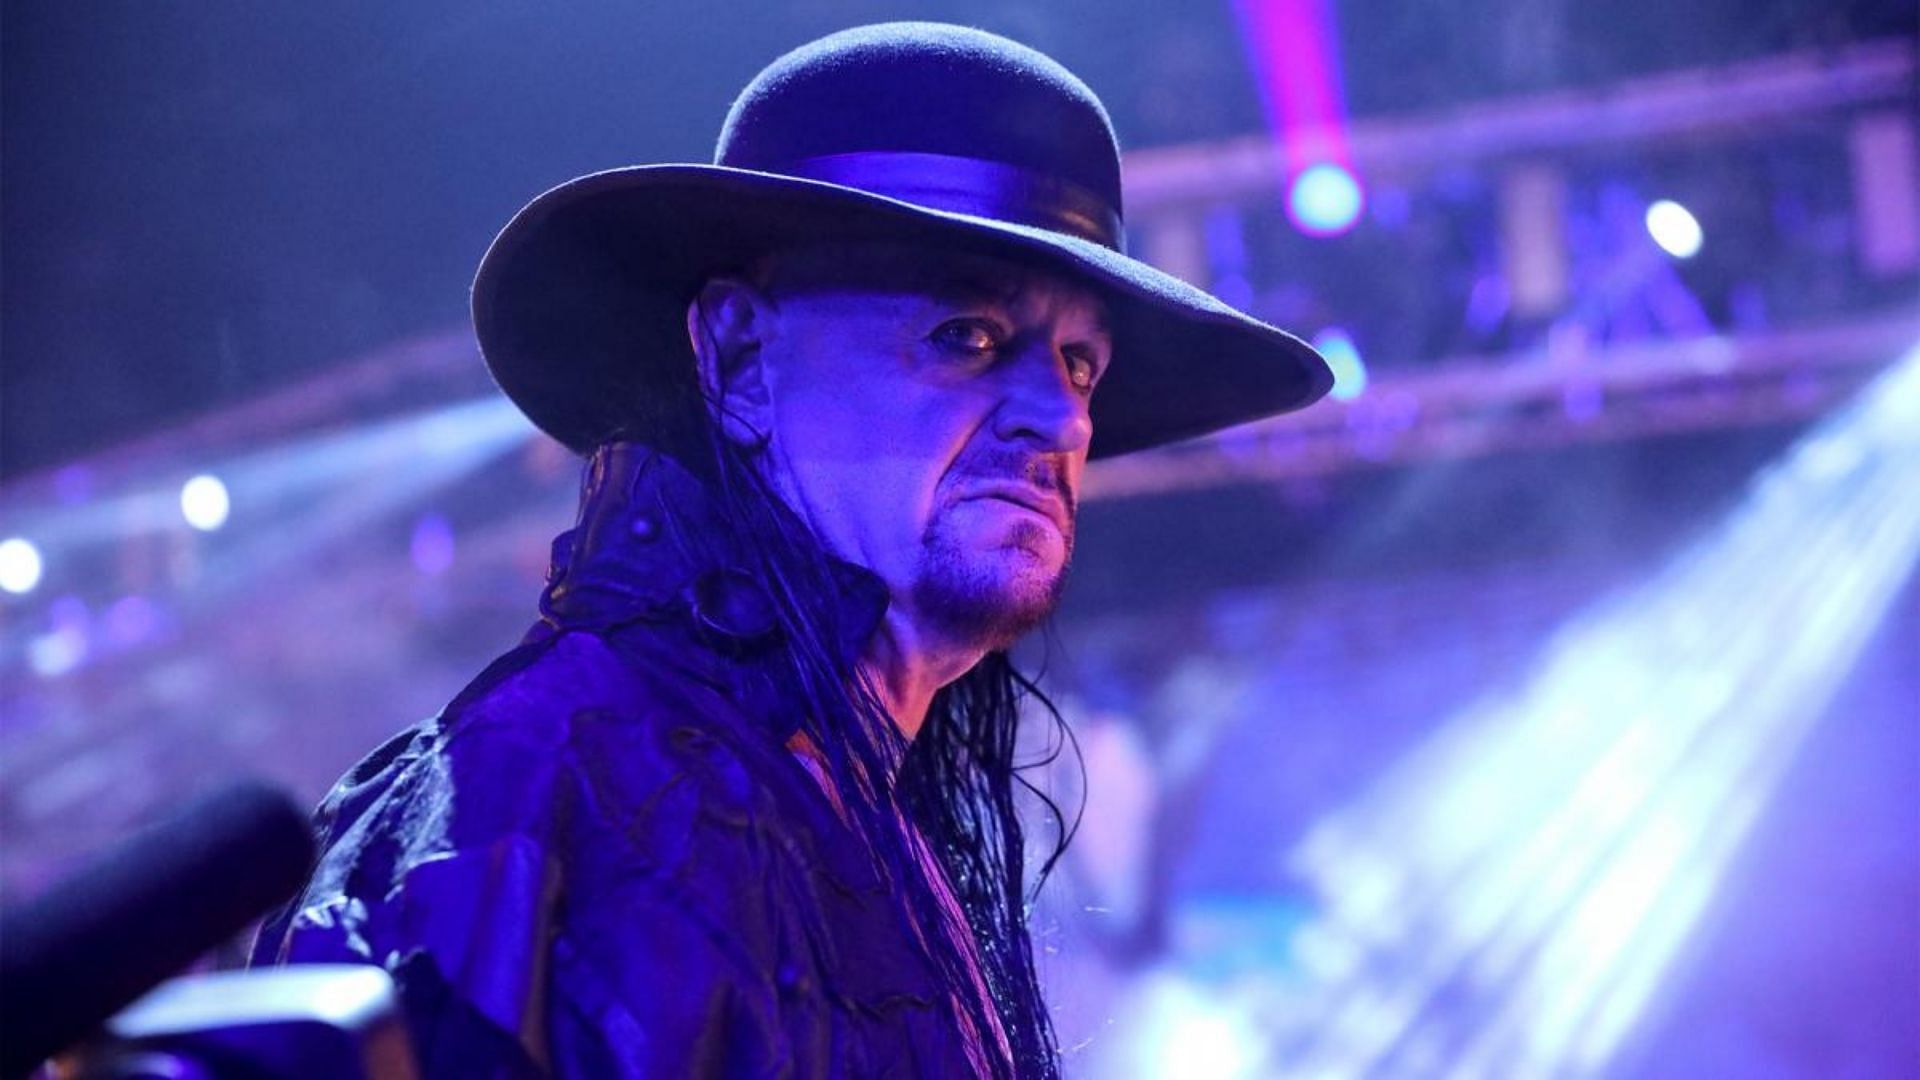 Apollo Crews has praised Undertaker after the interaction in New York.